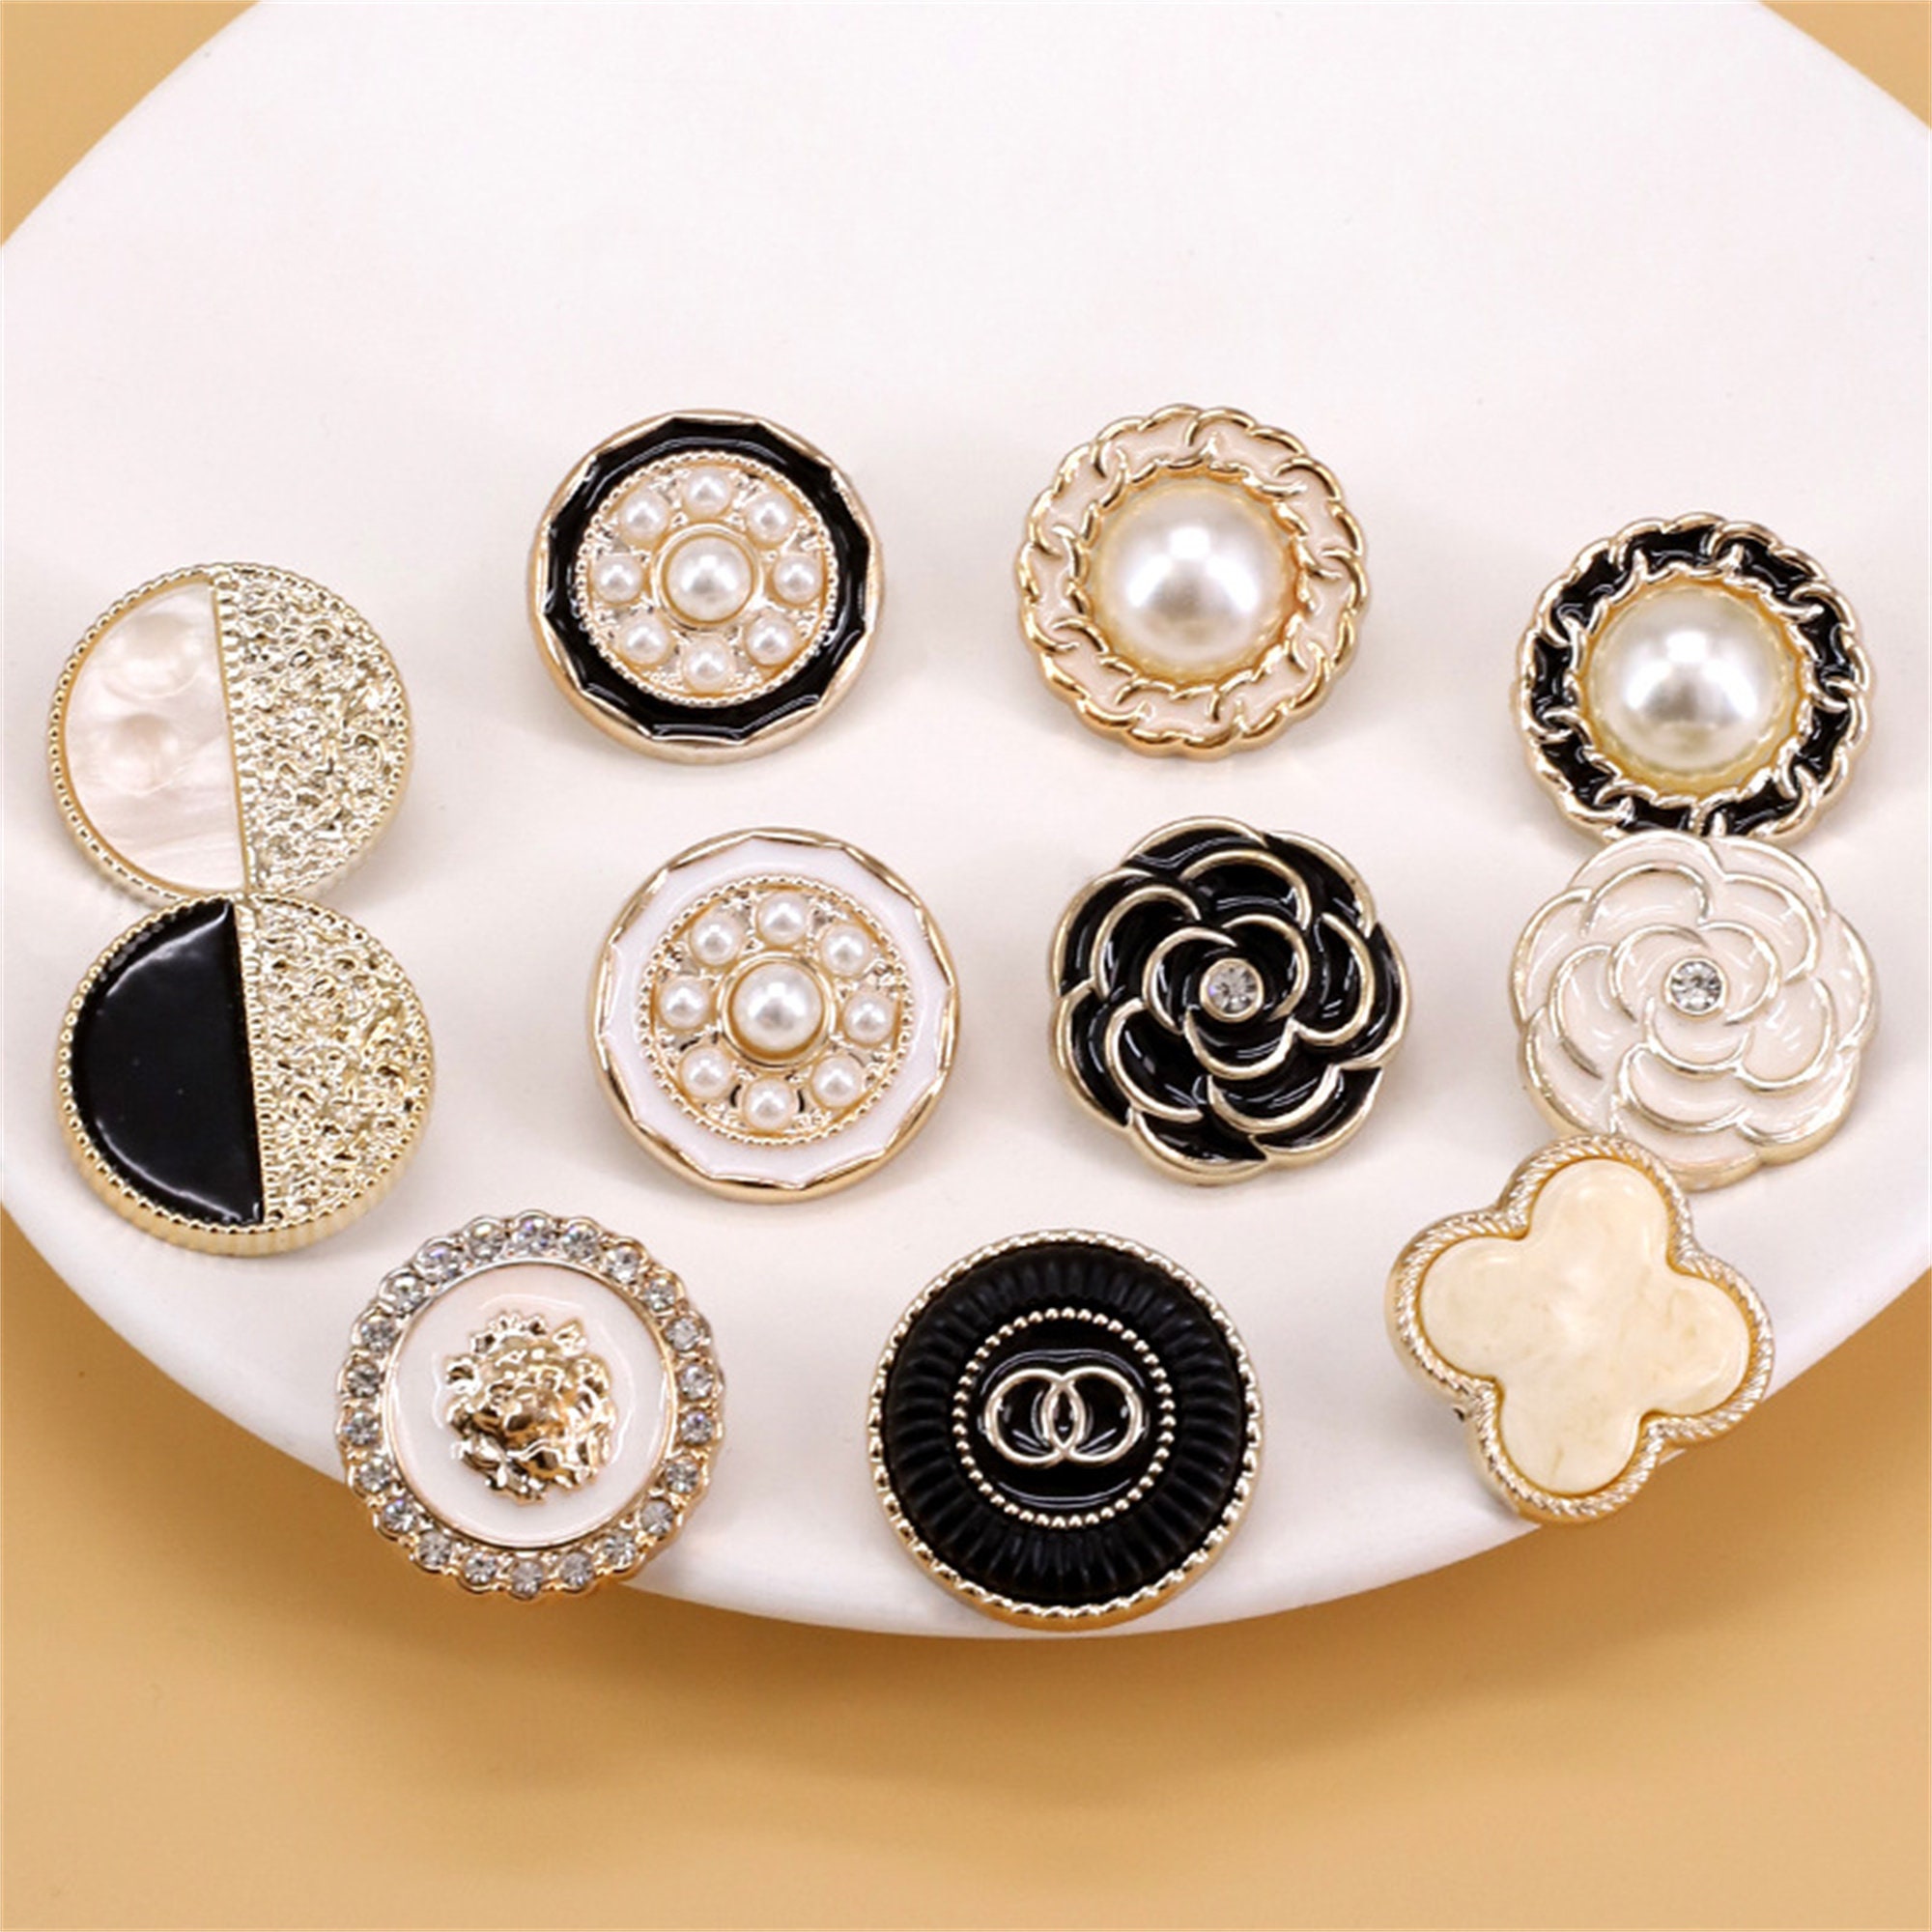 10pcs,haute Couture Coat Buttons,vintage Pearl Rhinestone Buttons,retro  Buttons,clothing Accessories,18-25mm Buttons,pearl Buttons Wholesale - Etsy